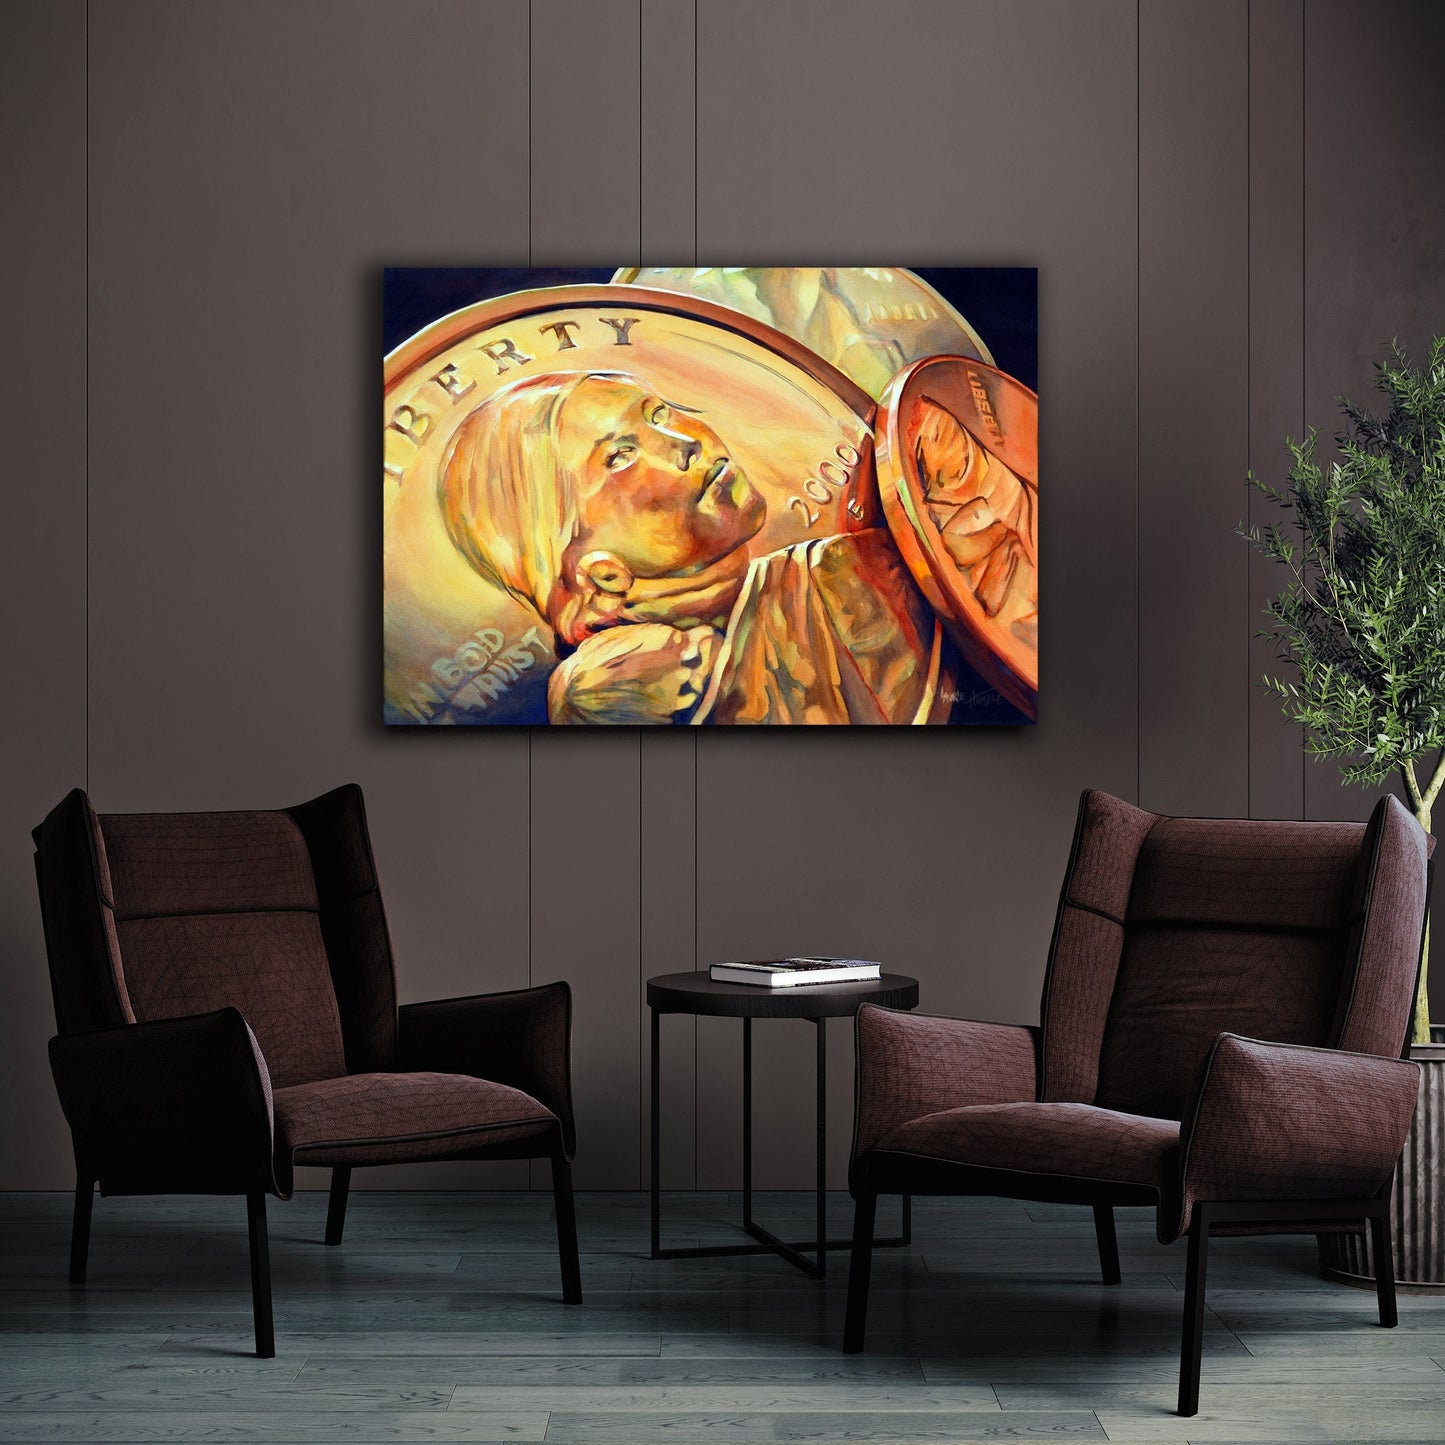 Office Wall Art, Money Painting, Sacagawea Dollar, US Currency, Large Scale Art, Canvas Print